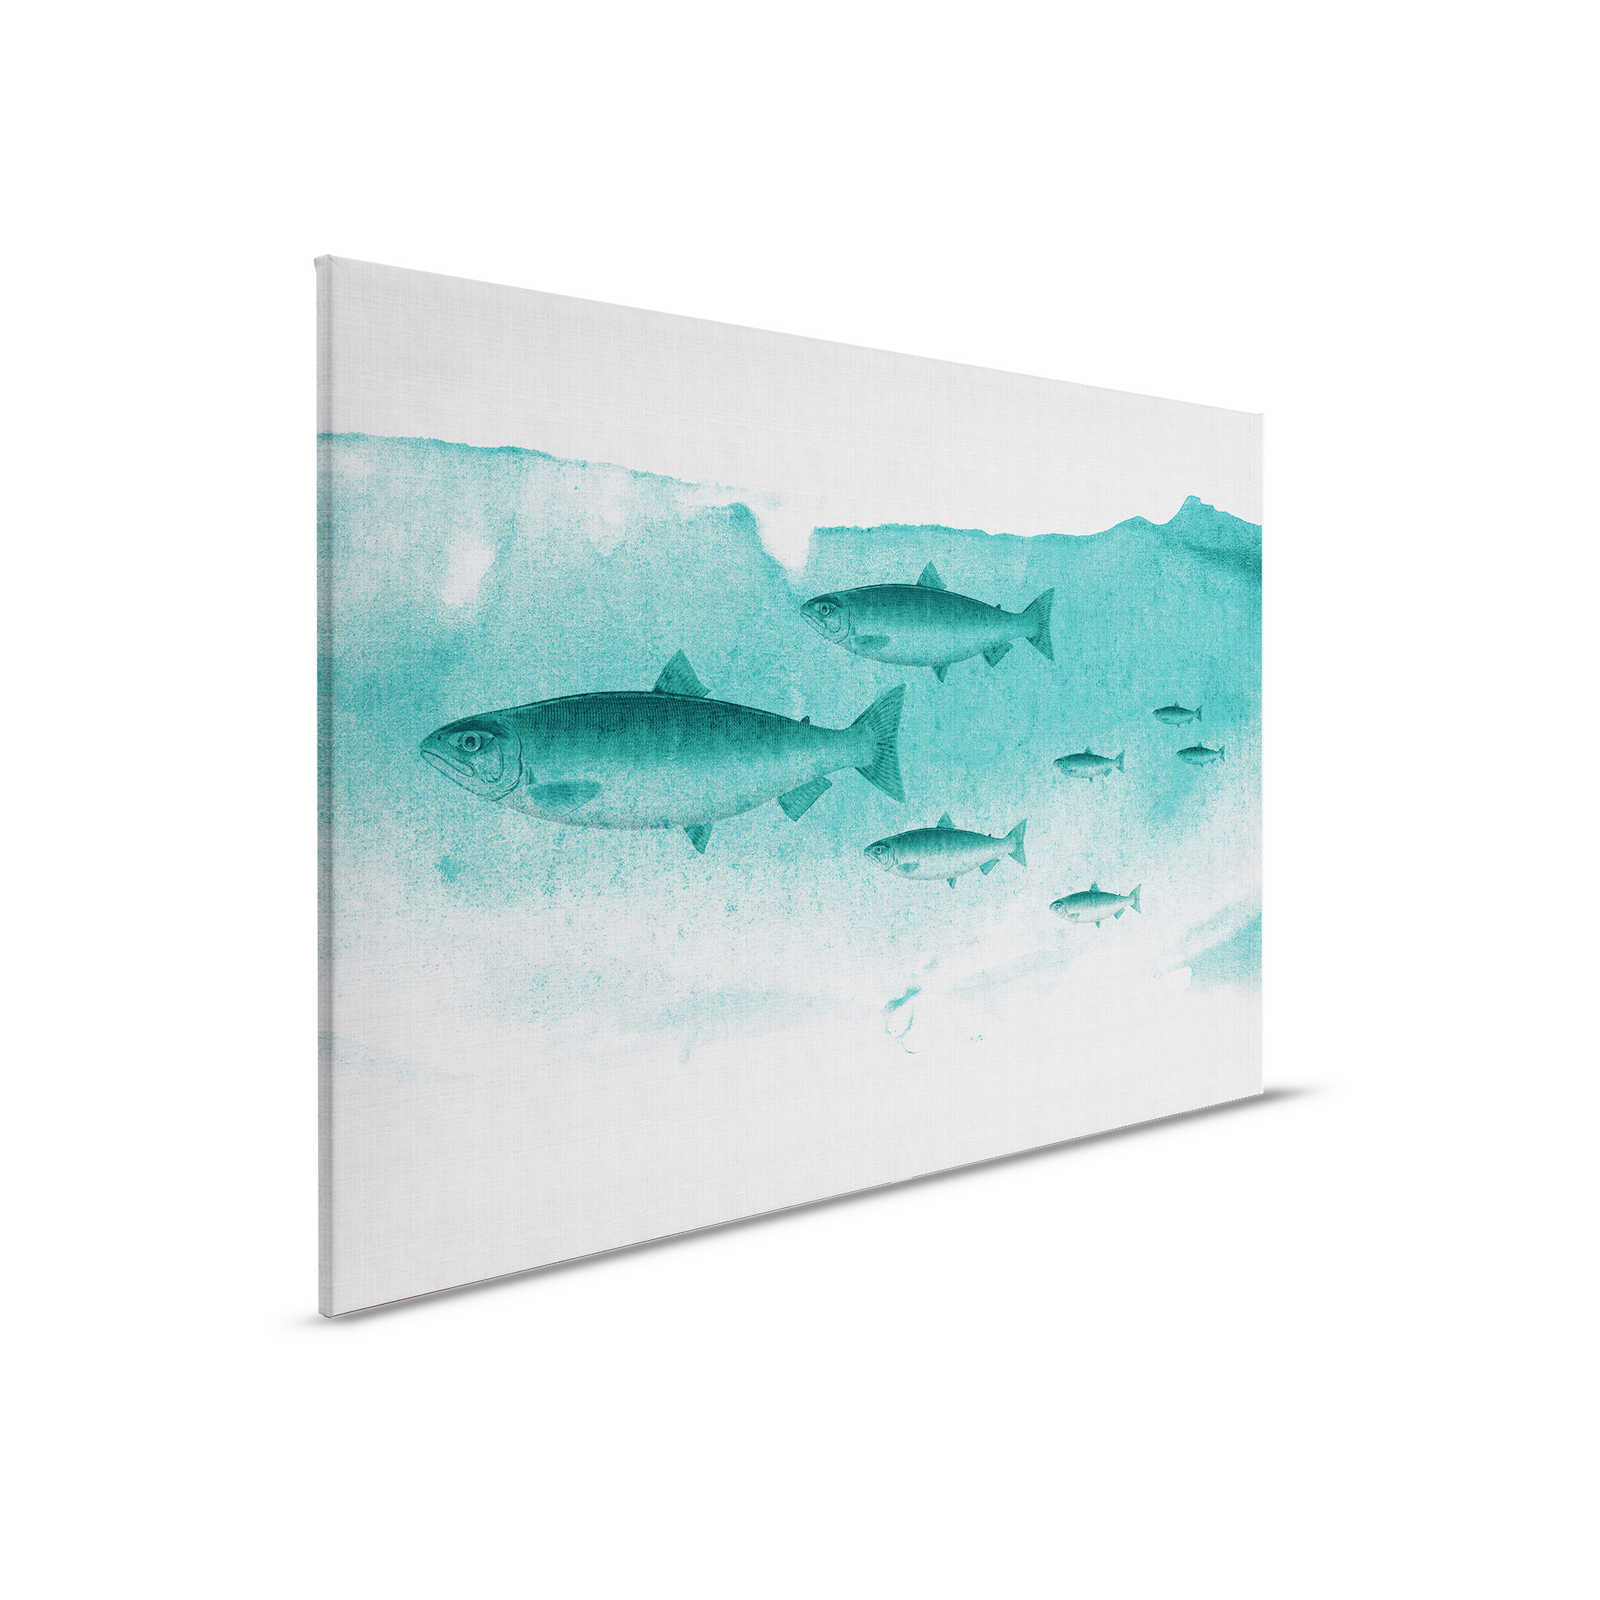 Into the blue 2 - Fish watercolour in green as canvas picture - natural linen structure - 0.90 m x 0.60 m
